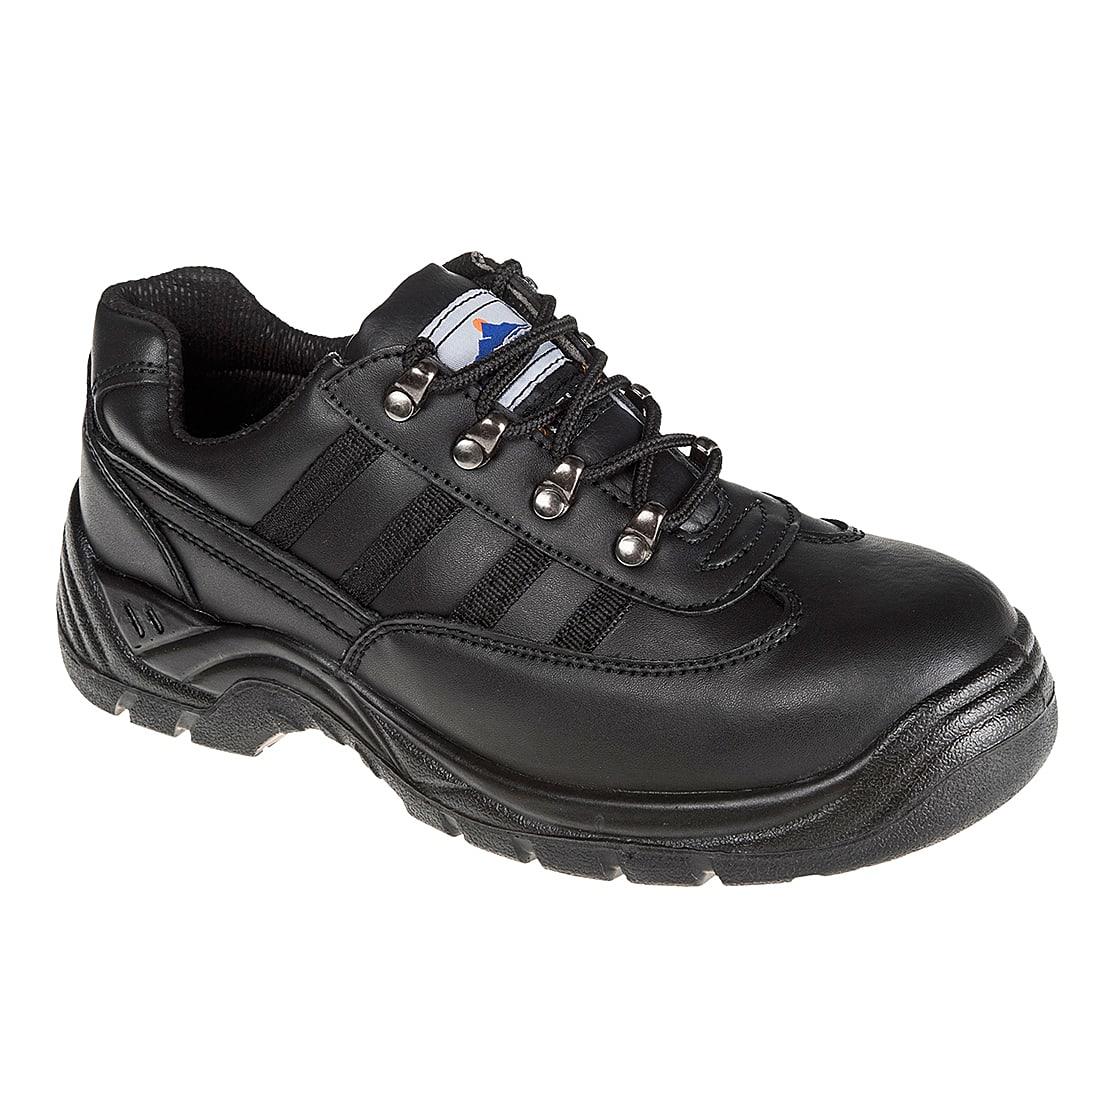 Portwest Steelite Safety Trainers S1 in Black (Product Code: FW15)